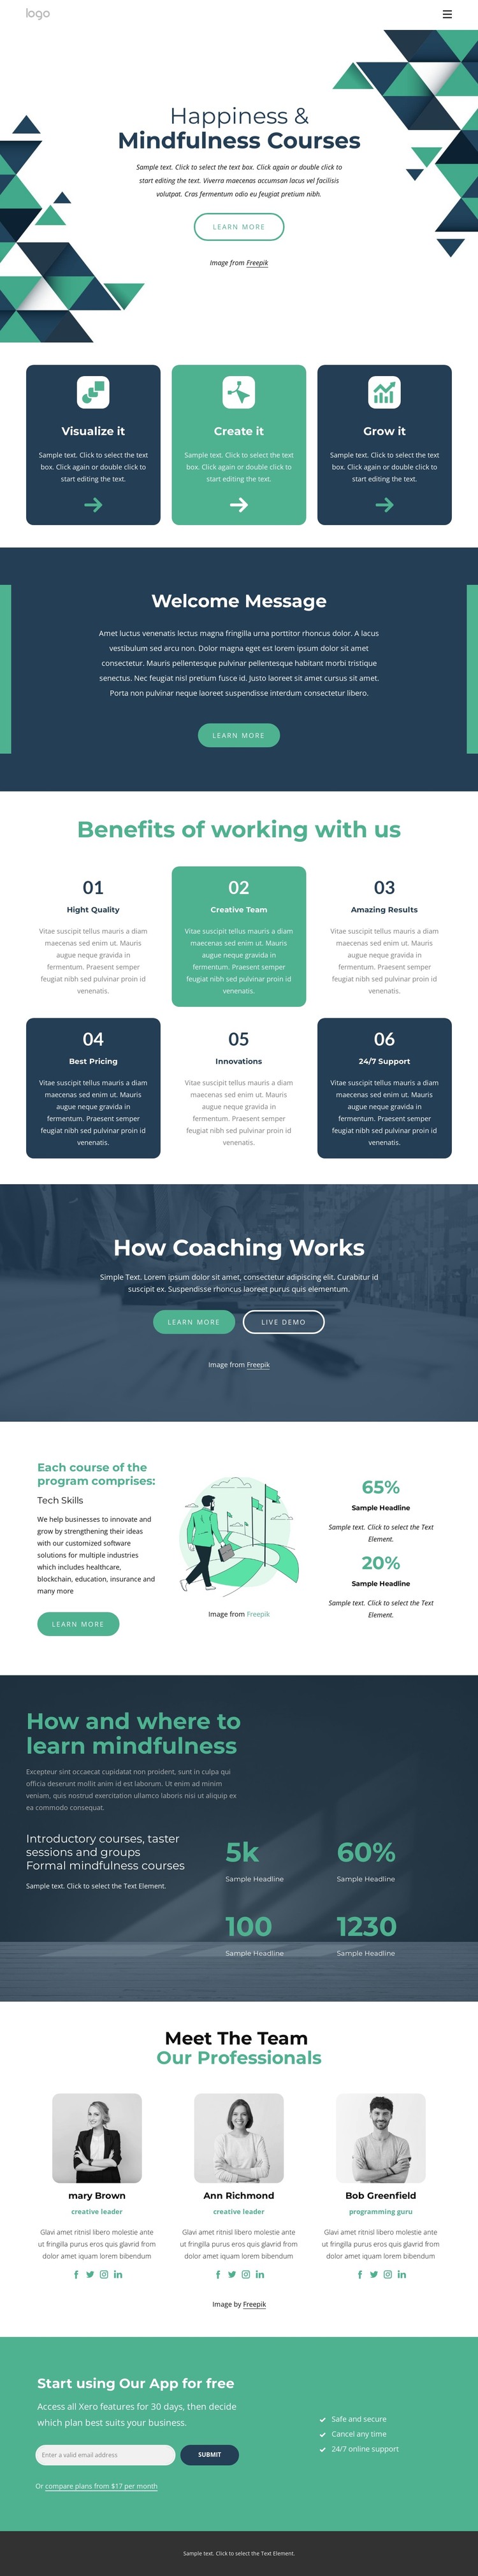 Top mindfulness courses HTML Template